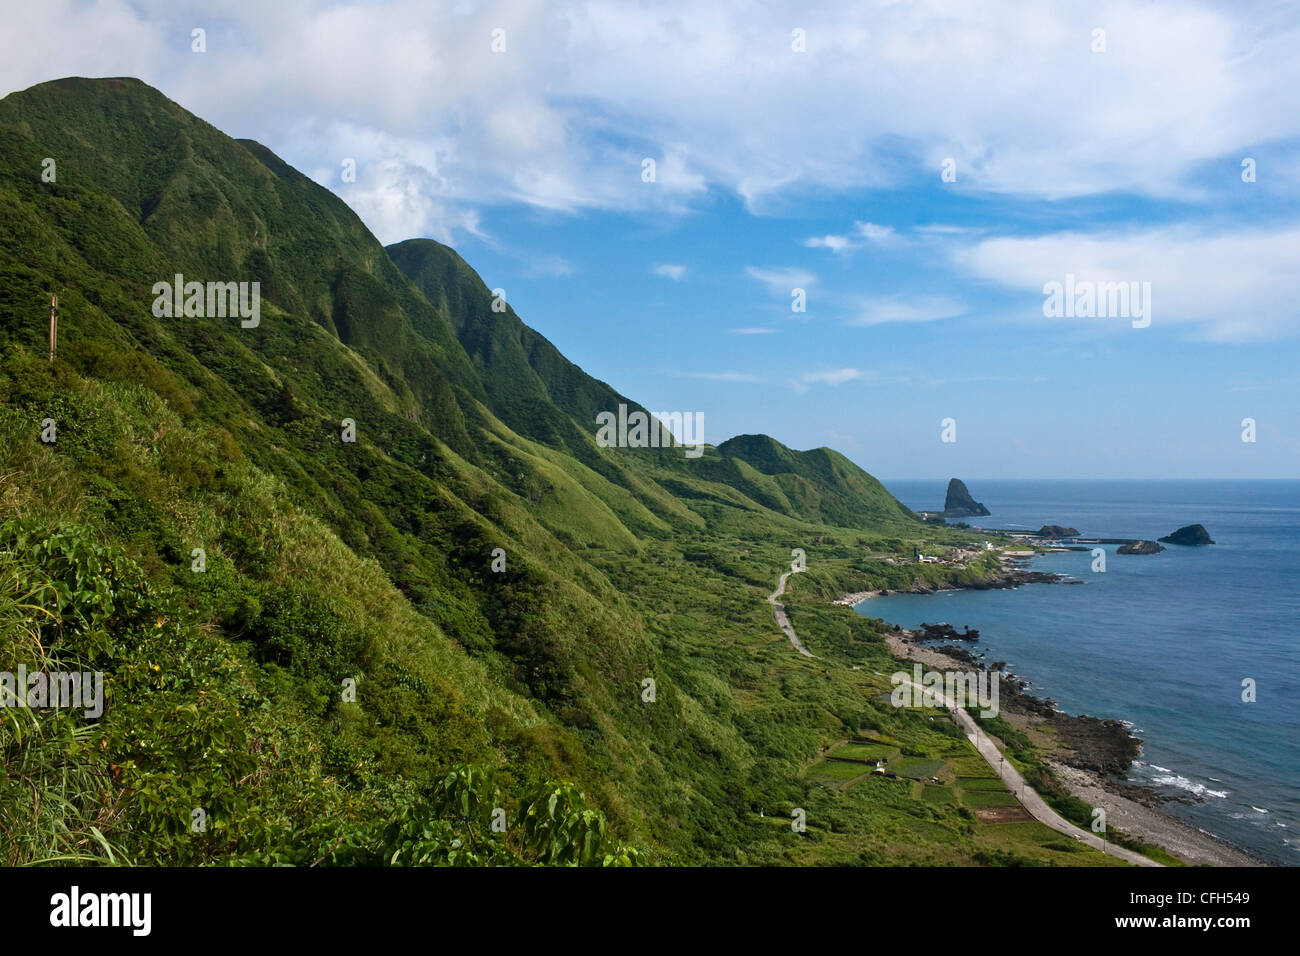 View of the dramatic coastal landscape of Lanyu (Orchid Island), Taiwan Stock Photo